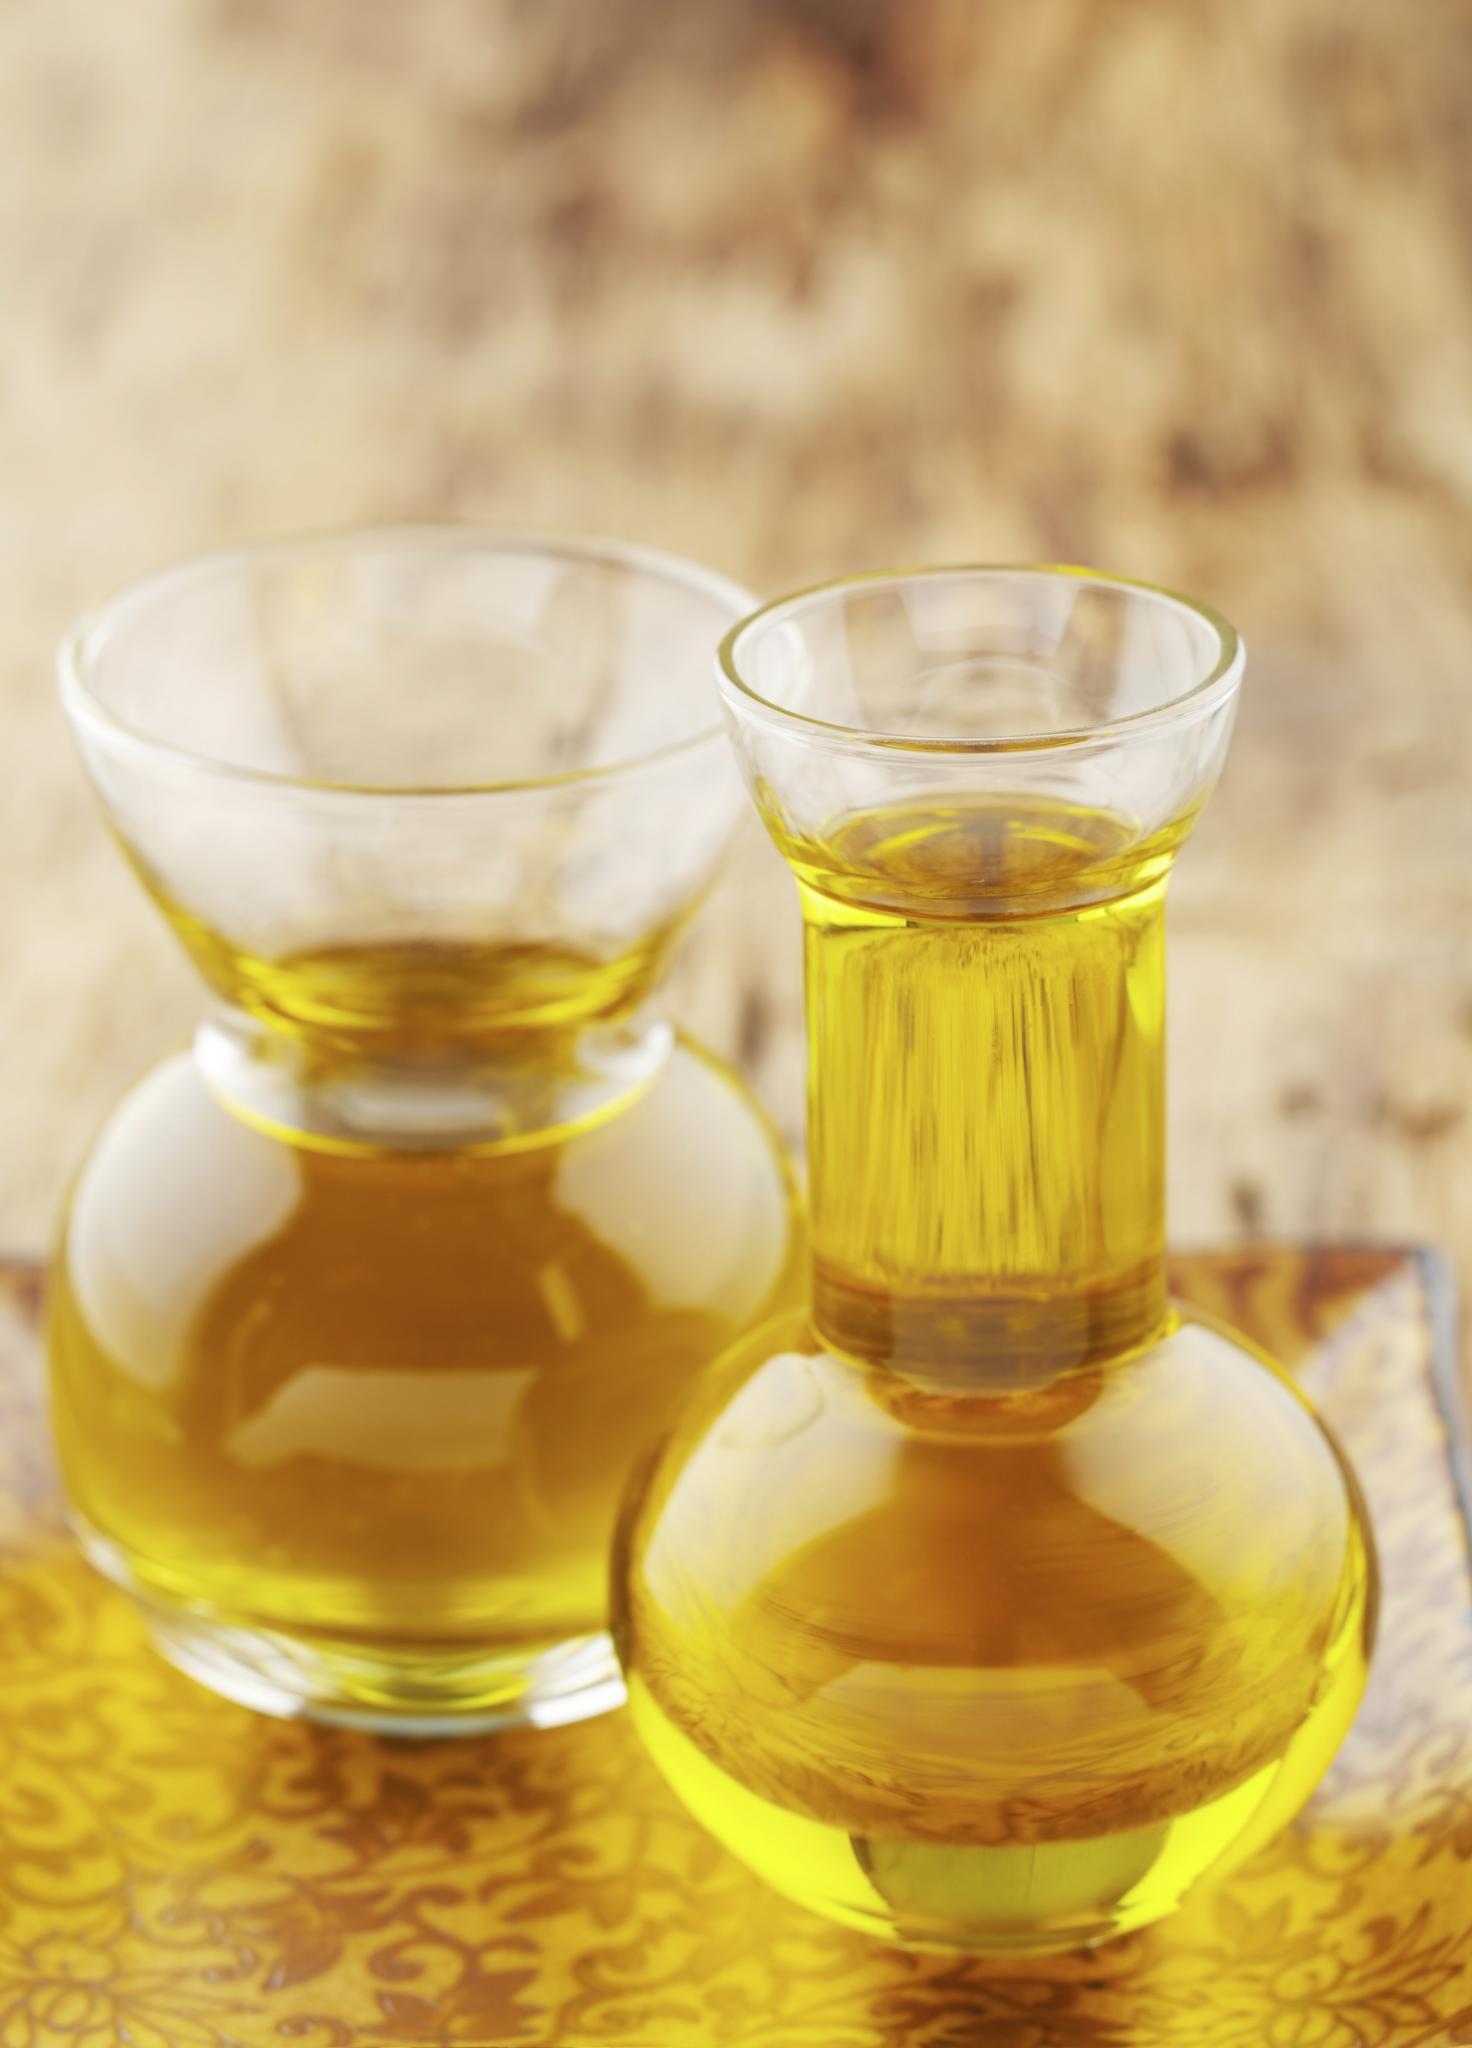 The Truth About Monoi Oil